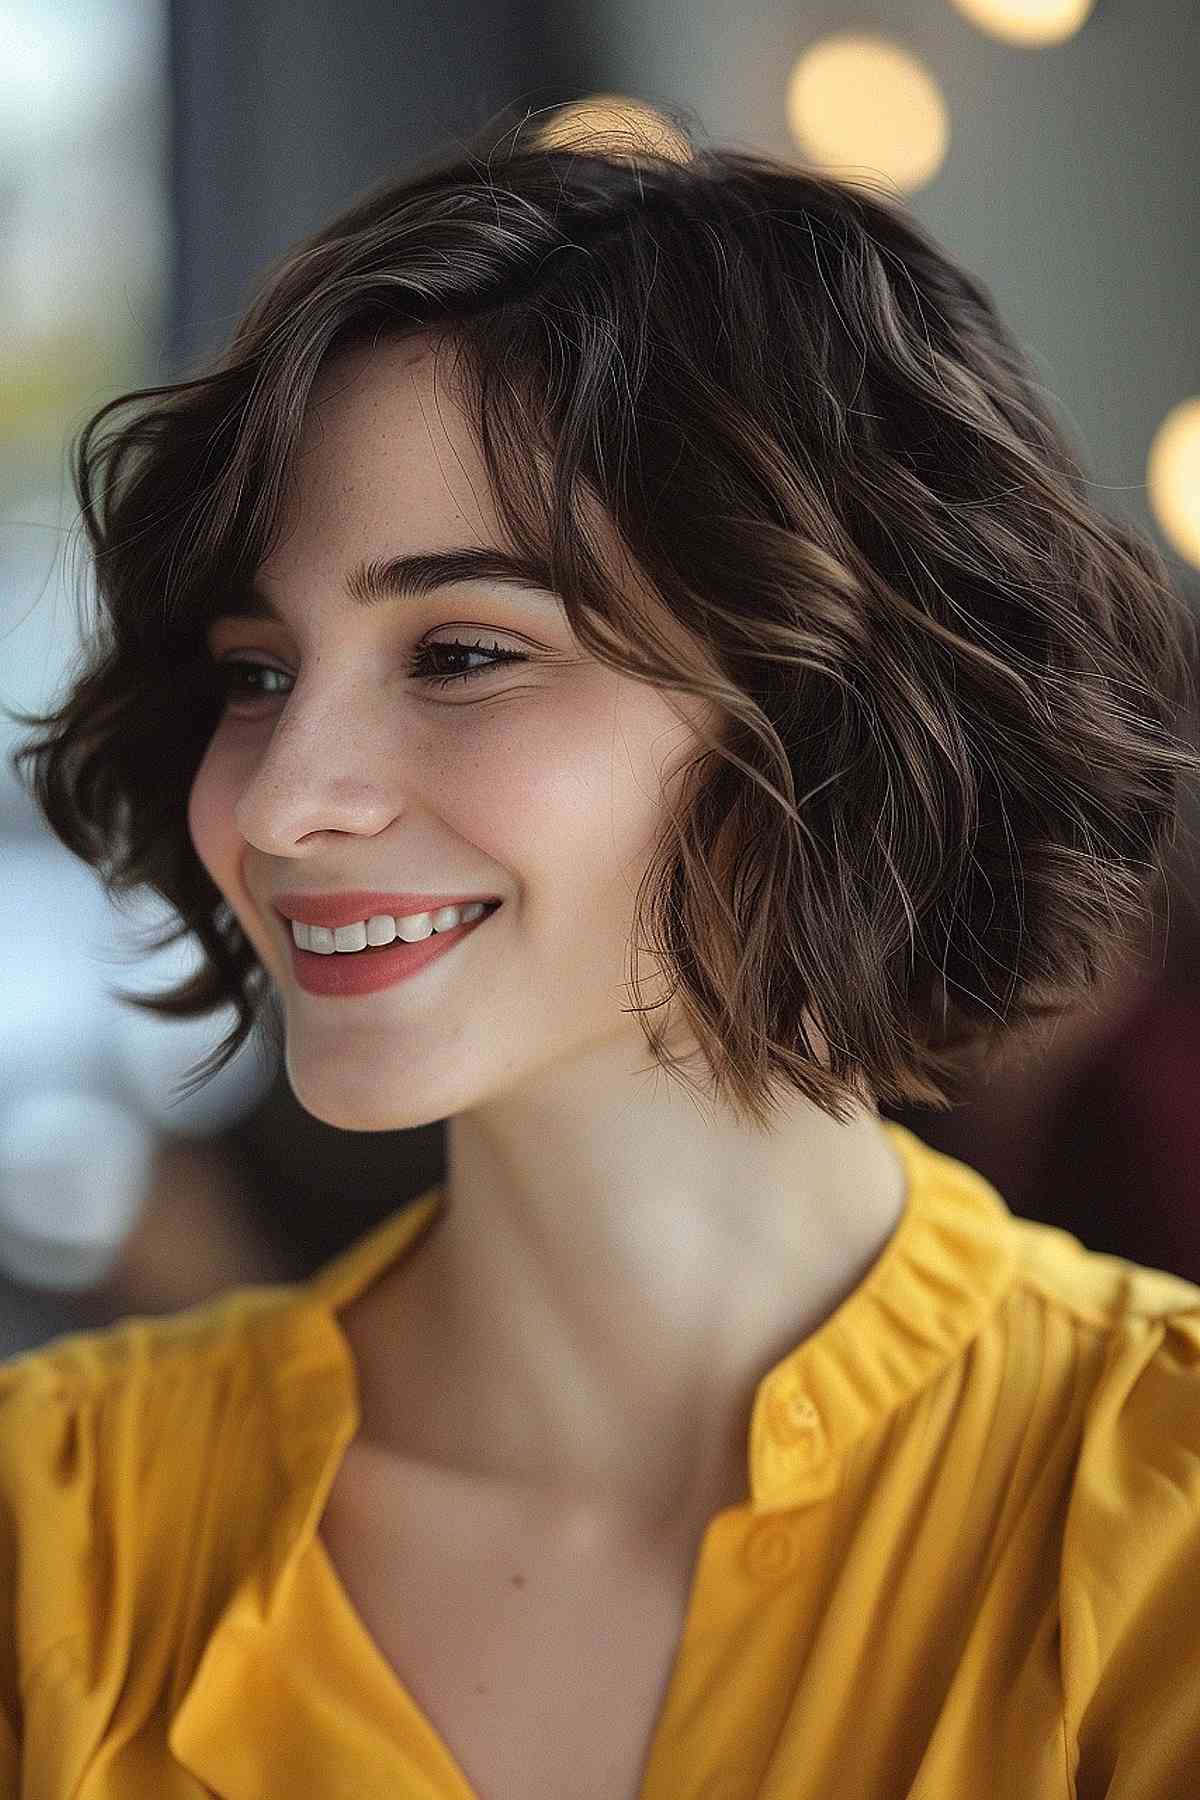 Chanel bob haircut with gentle waves for an elegant, versatile style.